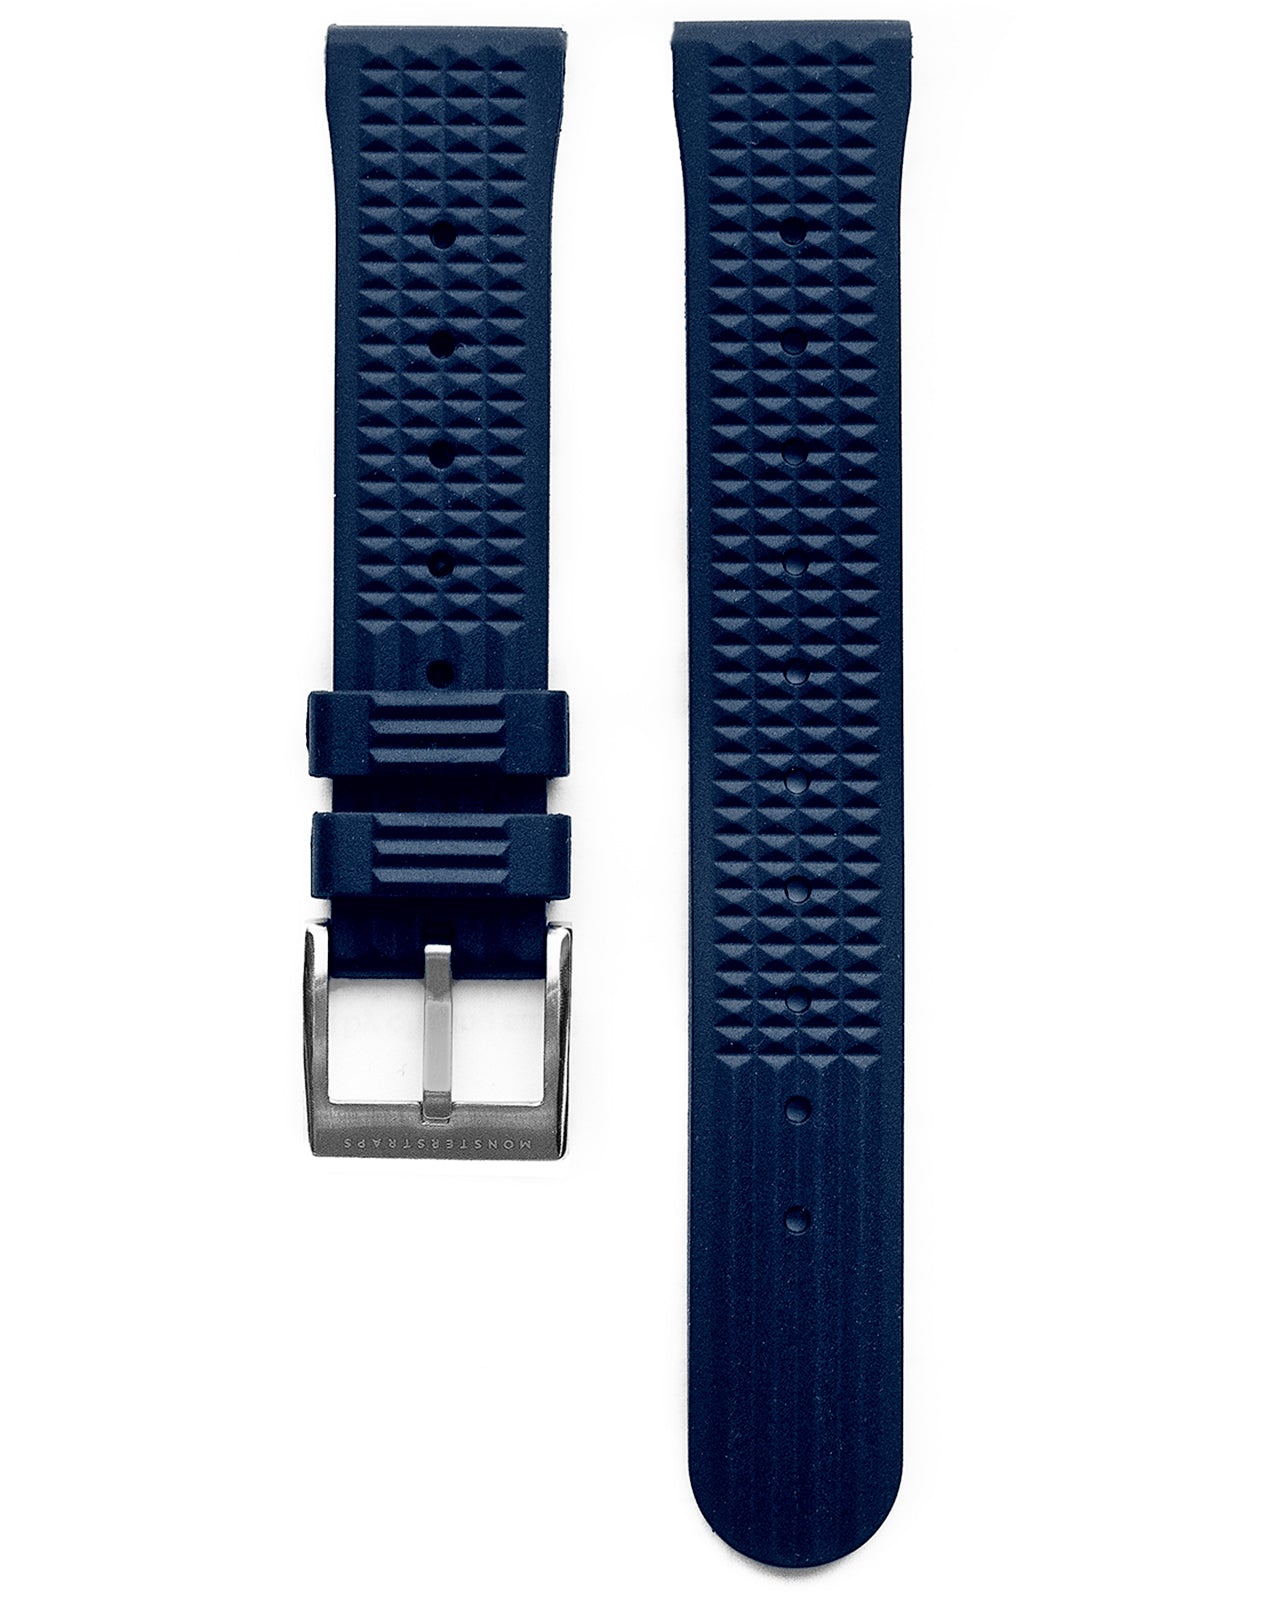 VULCANISED RUBBER - WAFFLE STRAP (NAVY, VINTAGE STYLE)